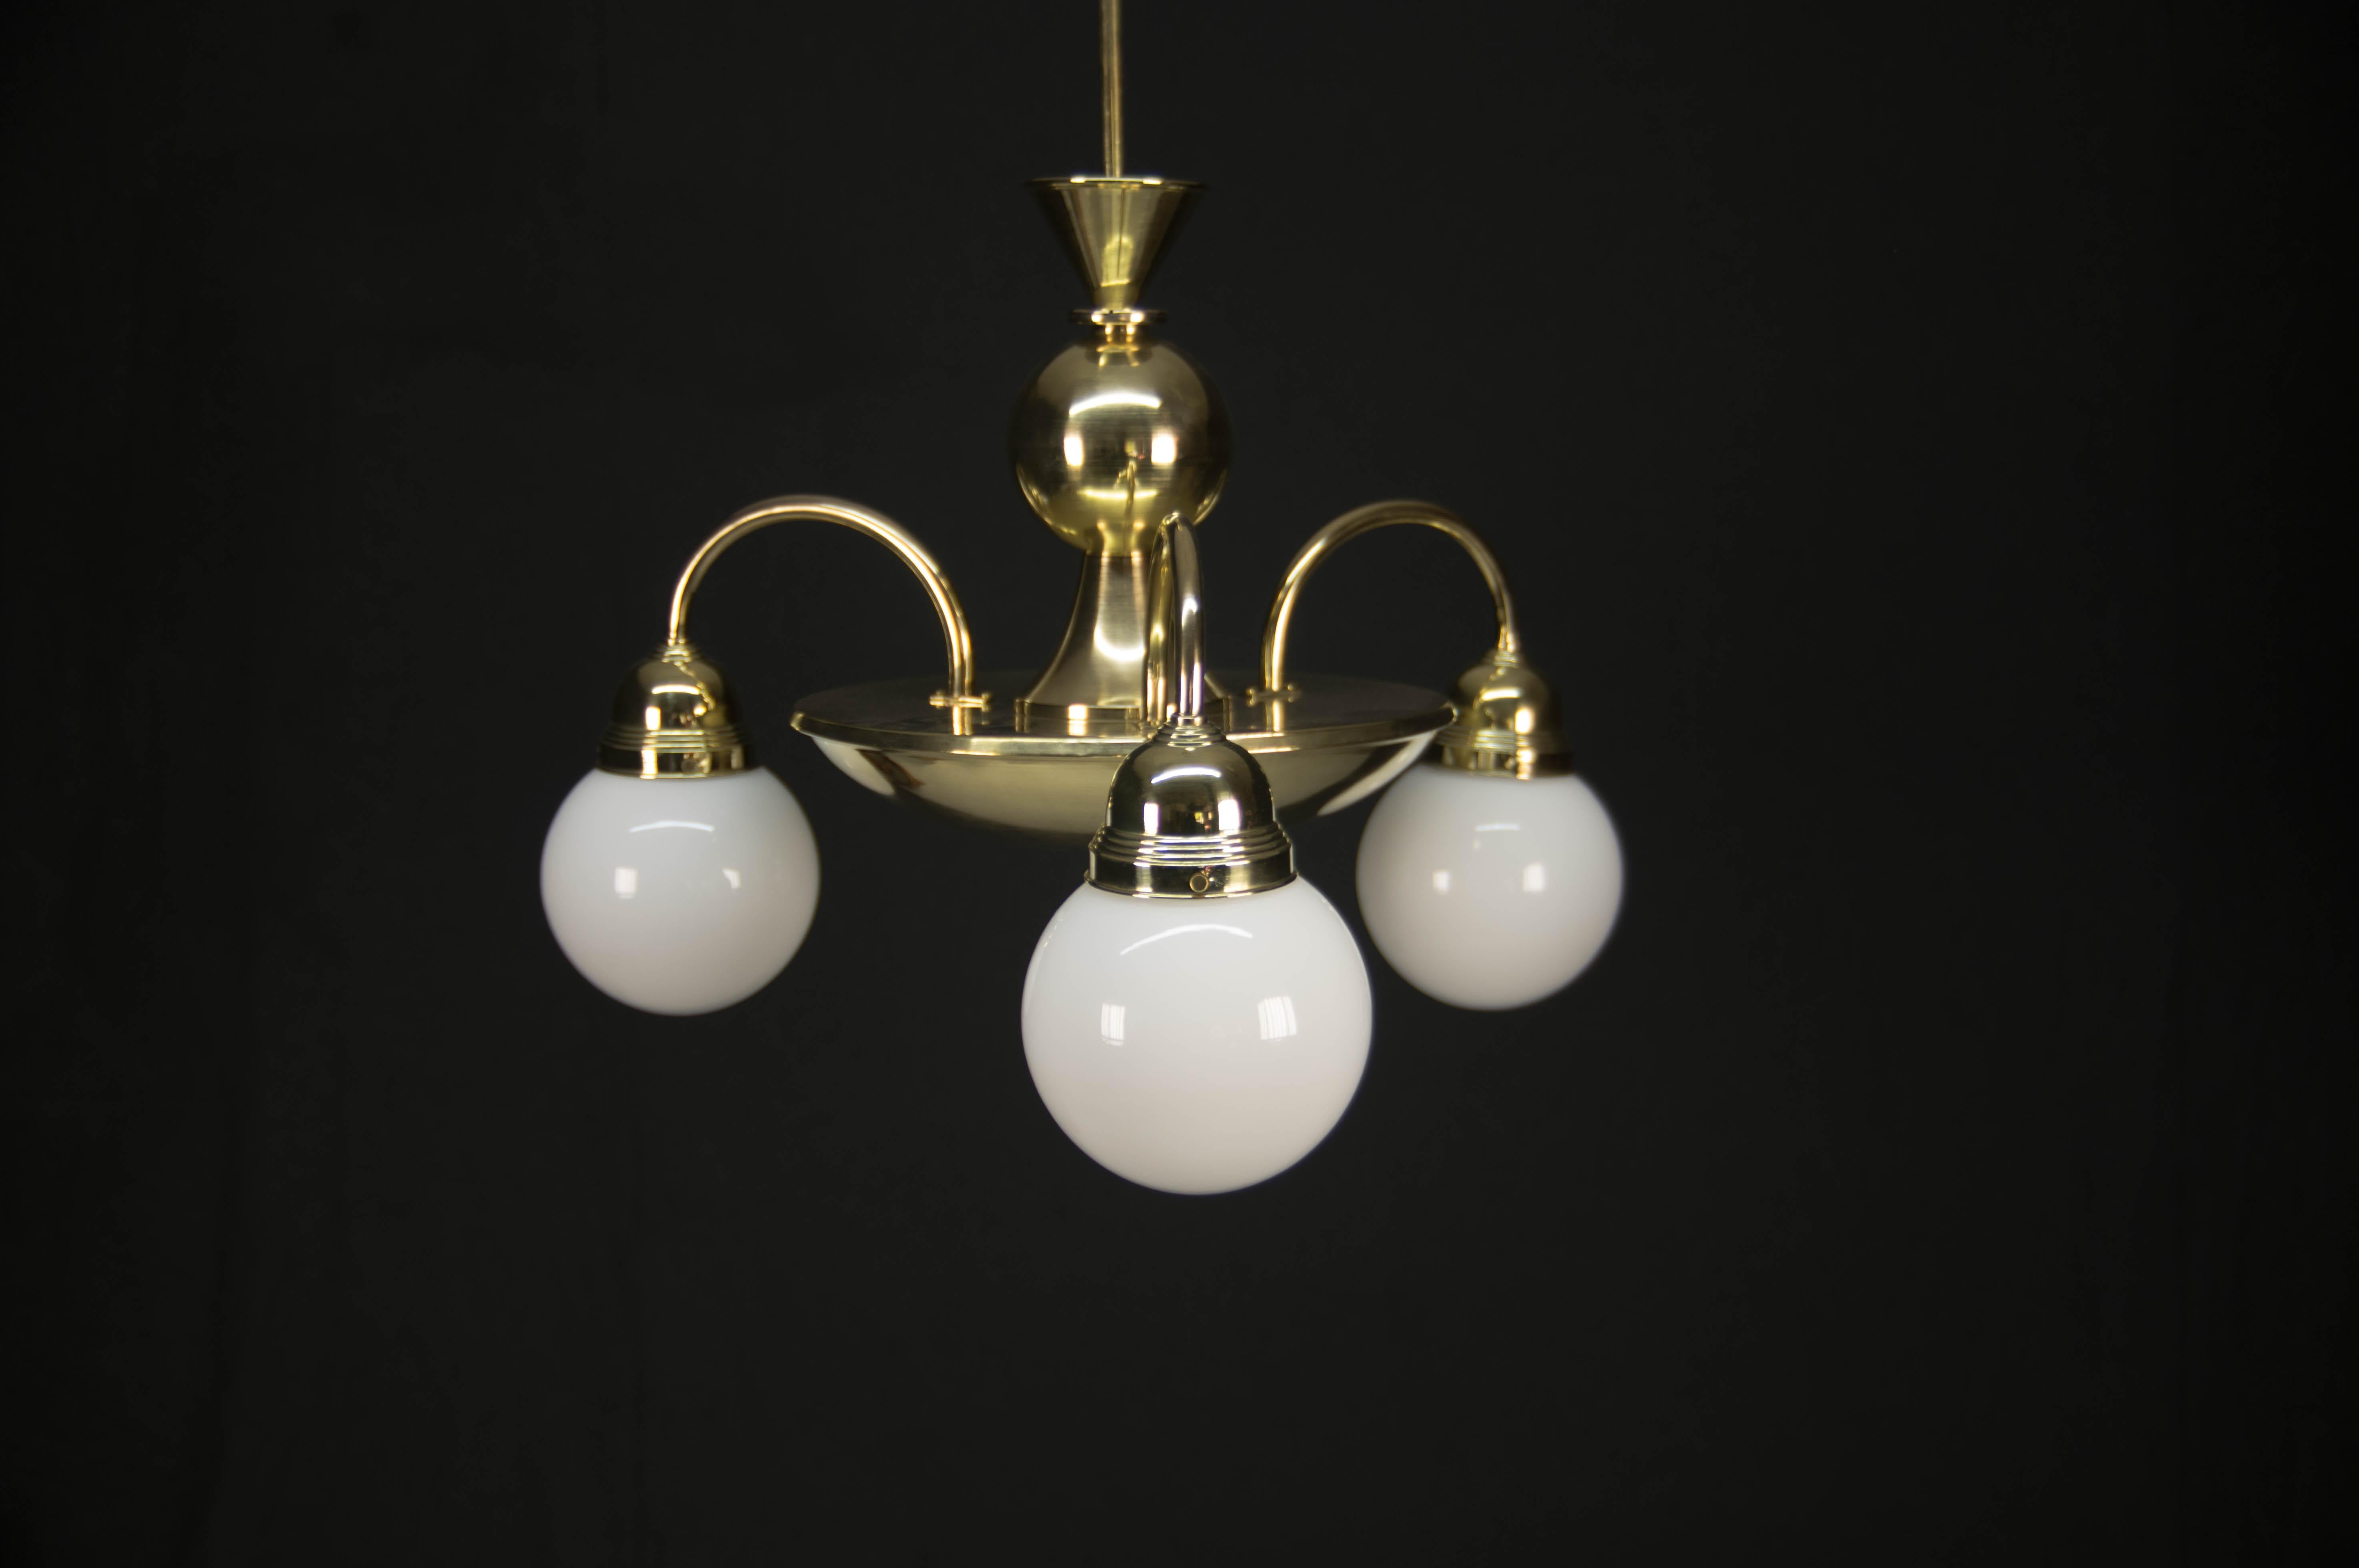 3-flamming rondocubistic brass chandelier.
Completely restored
3x60W, E25-E27 bulbs
Rewired
US wiring compatible.